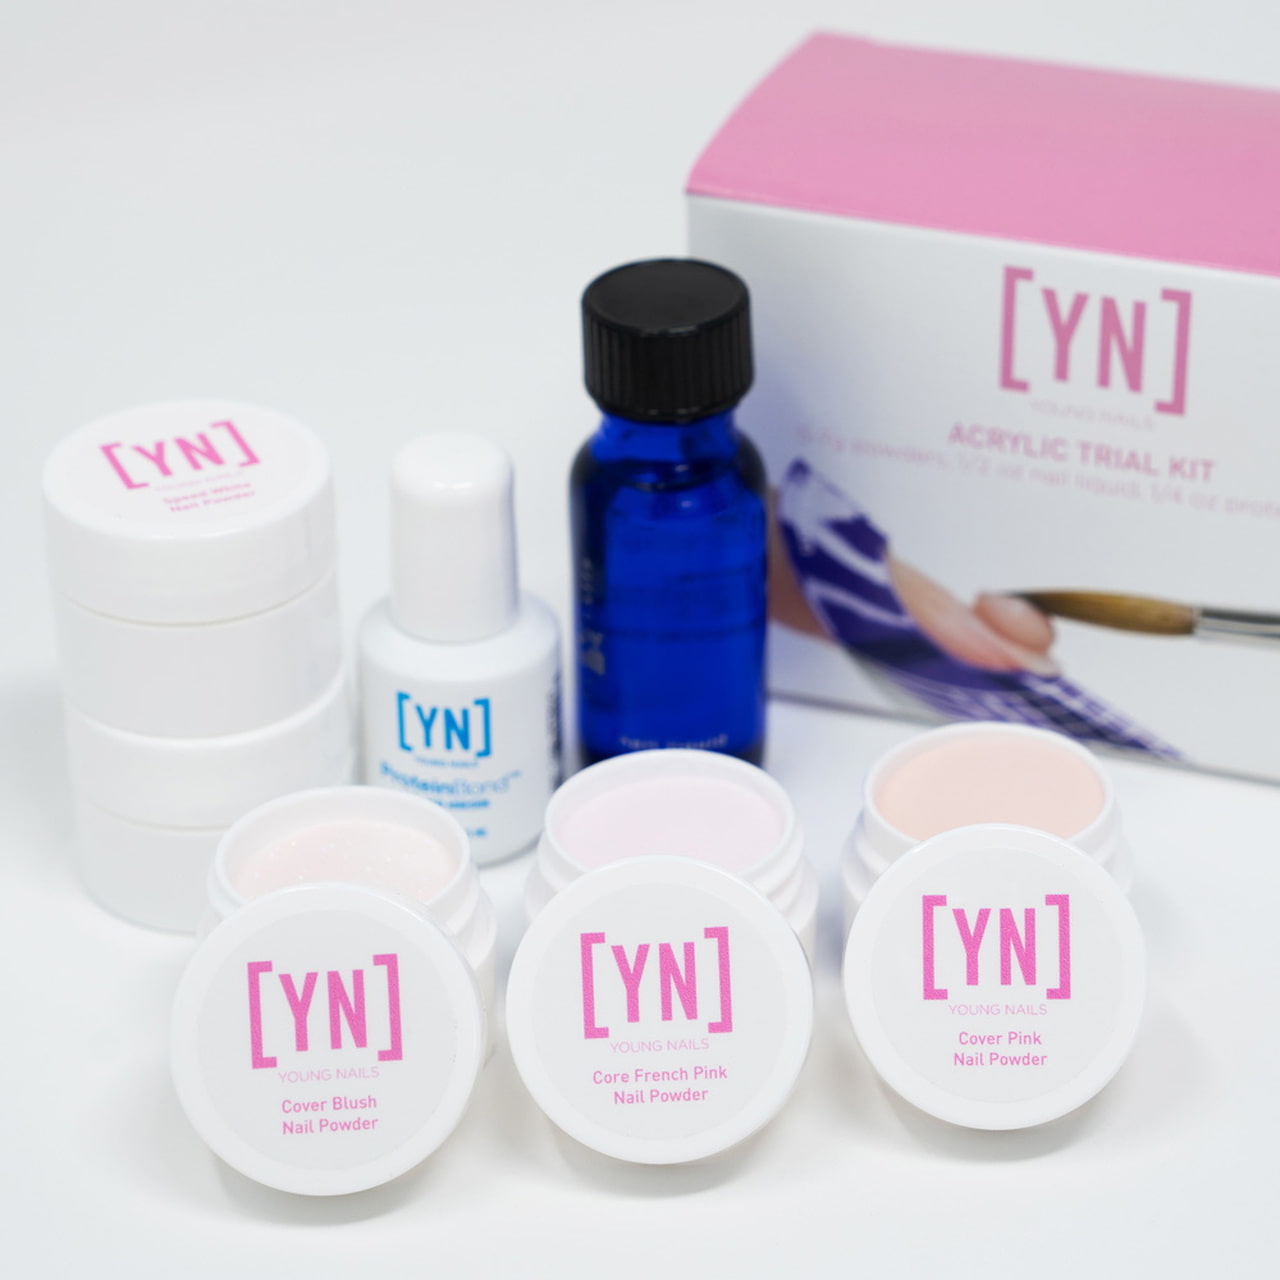 Young Nails Acrylic Powder is designed to work together, chemically, Yn nails acrylic system was created with exact particle blend technology that gives you flawless consistency, superior adhesion.